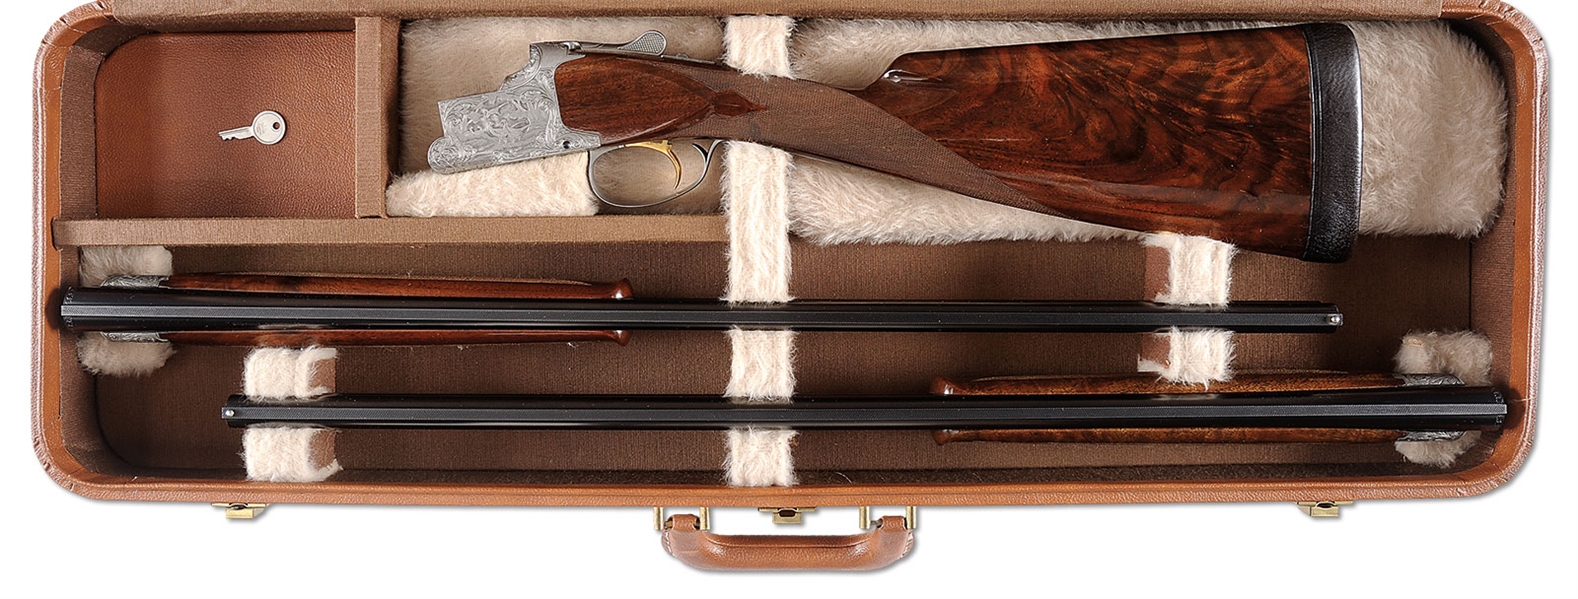 BROWNING SUPERPOSED OU DIANA, 299IV73, 28 & 20, MODERN                                                                                                                                                  